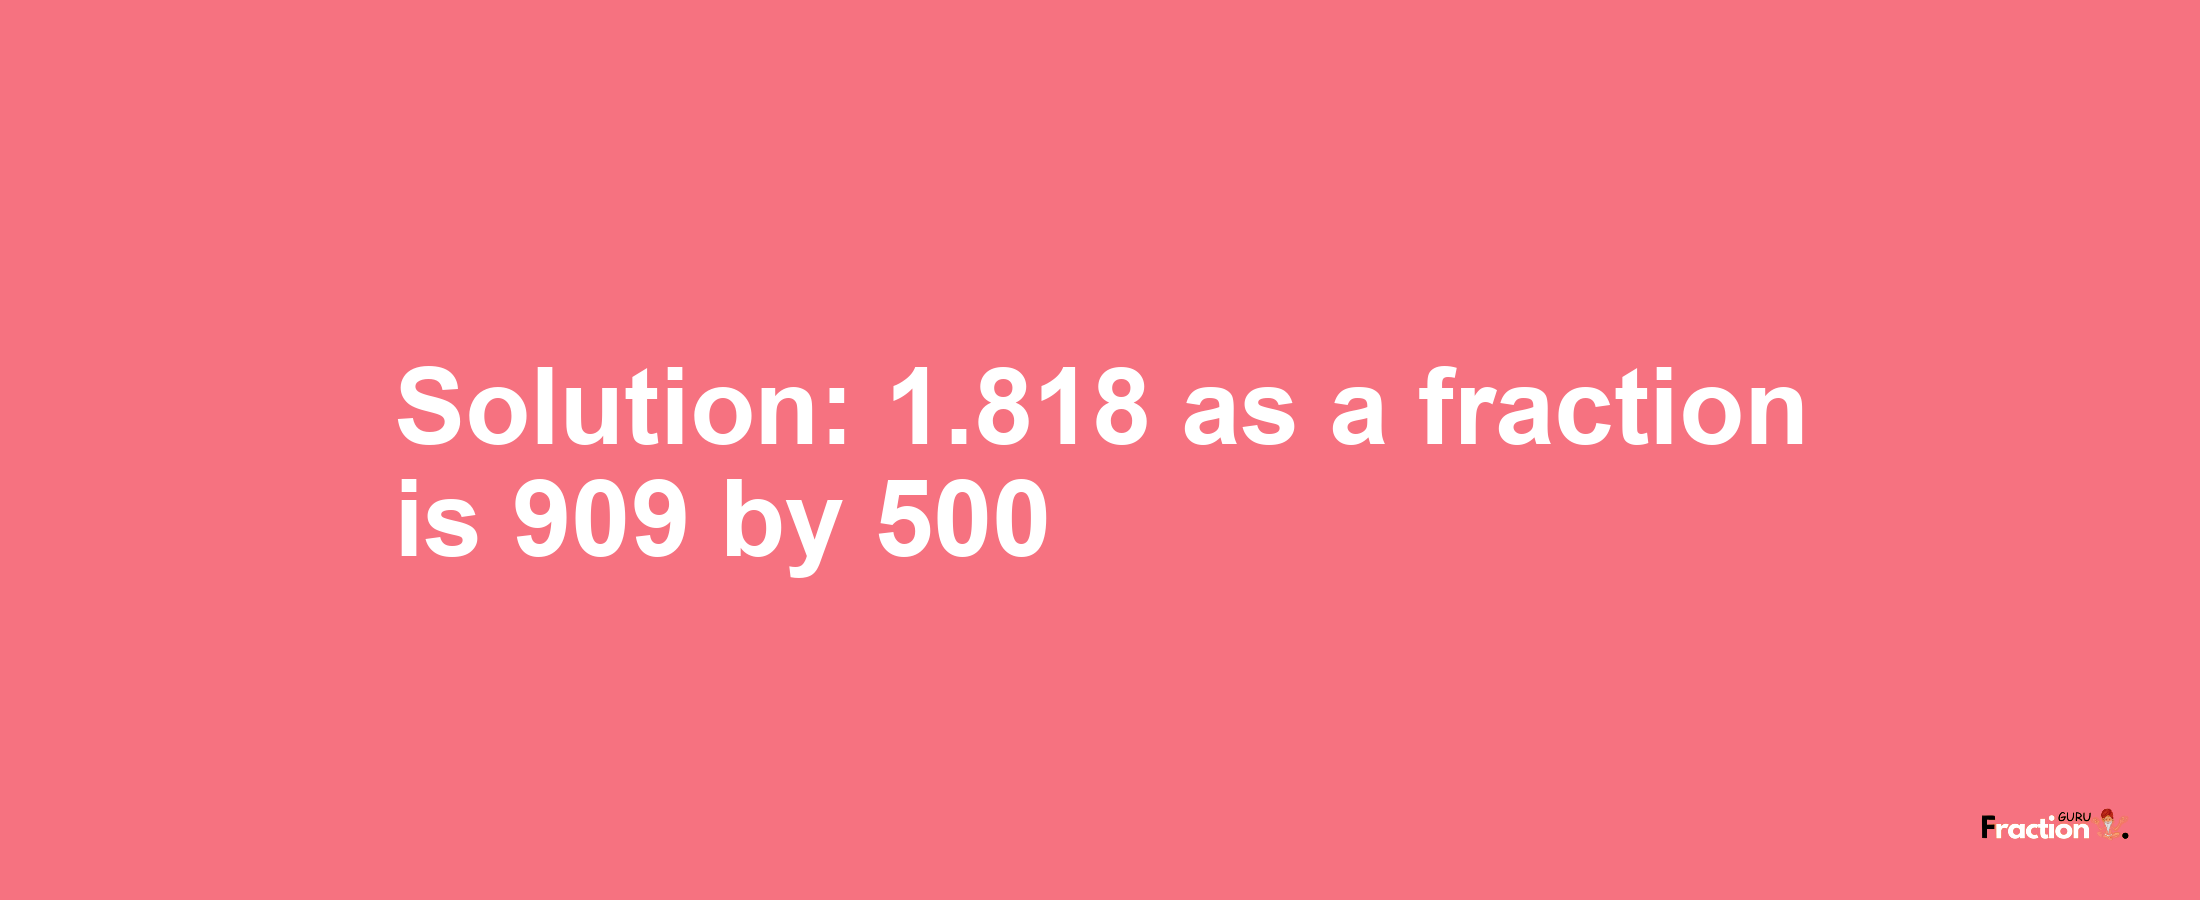 Solution:1.818 as a fraction is 909/500